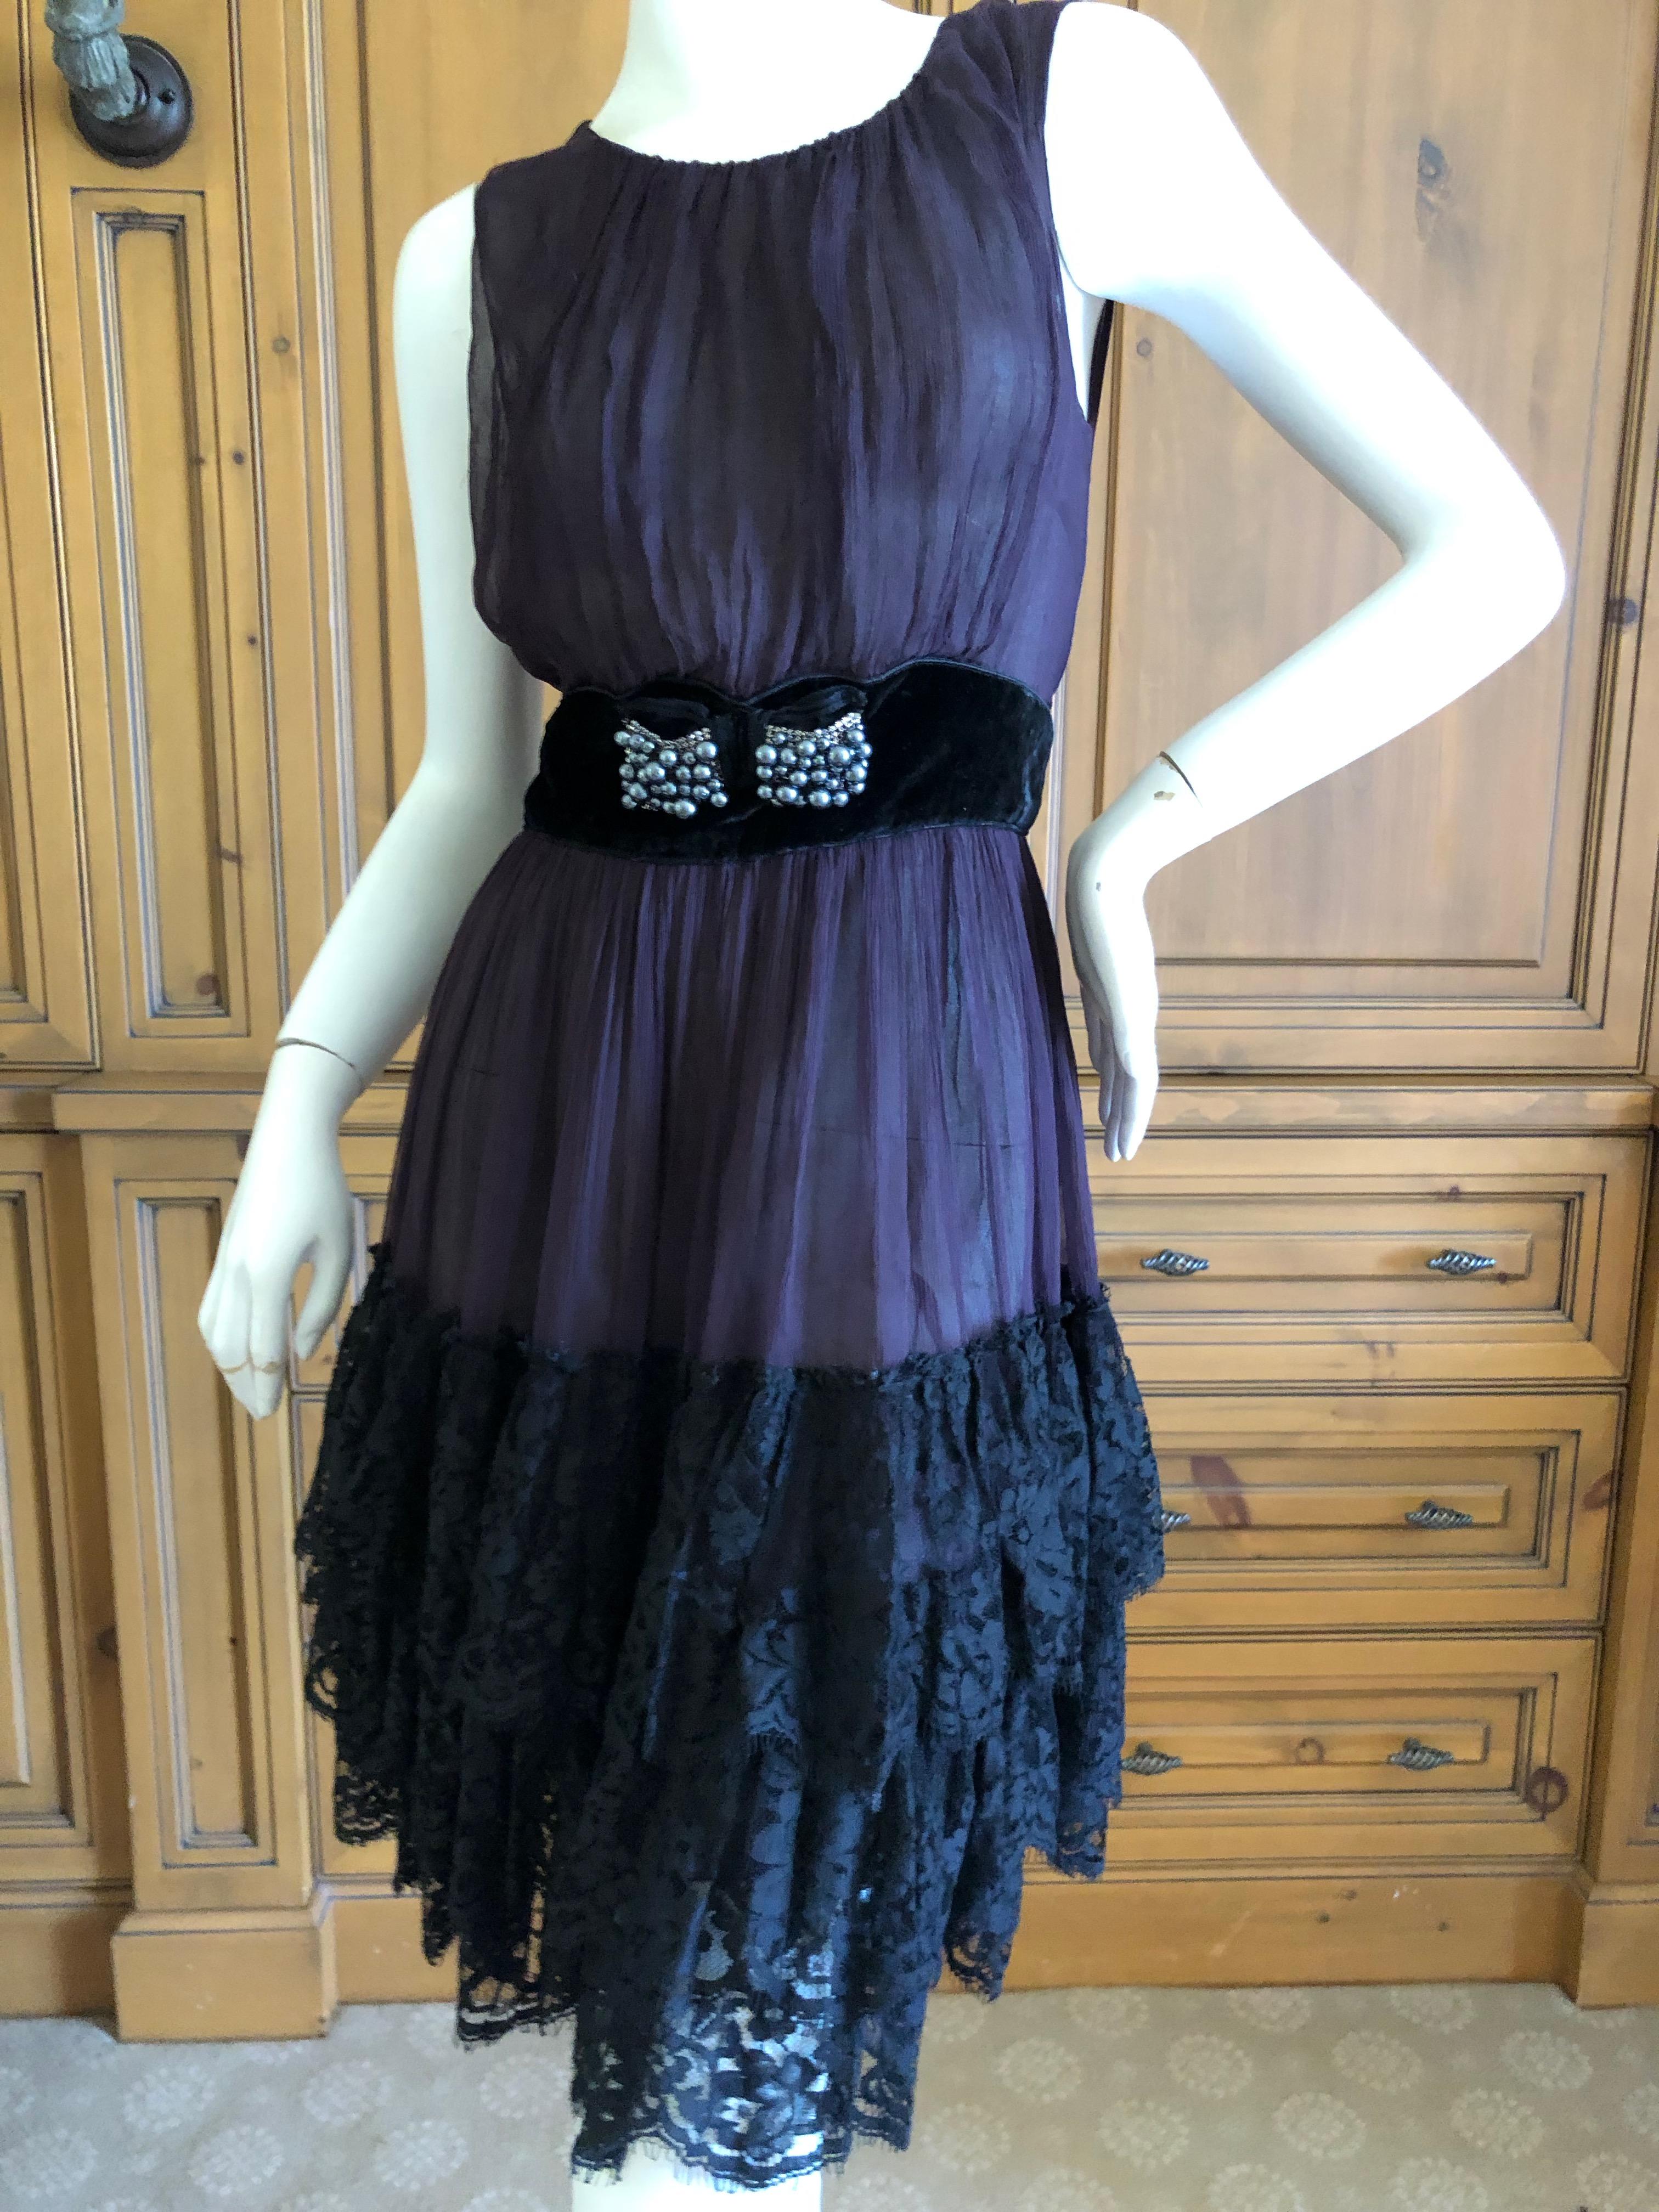 Dolce & Gabbana for D&G Vintage Sheer Tiered Lace Dress with Pearl Accents
Marked Size 44
Bust 36